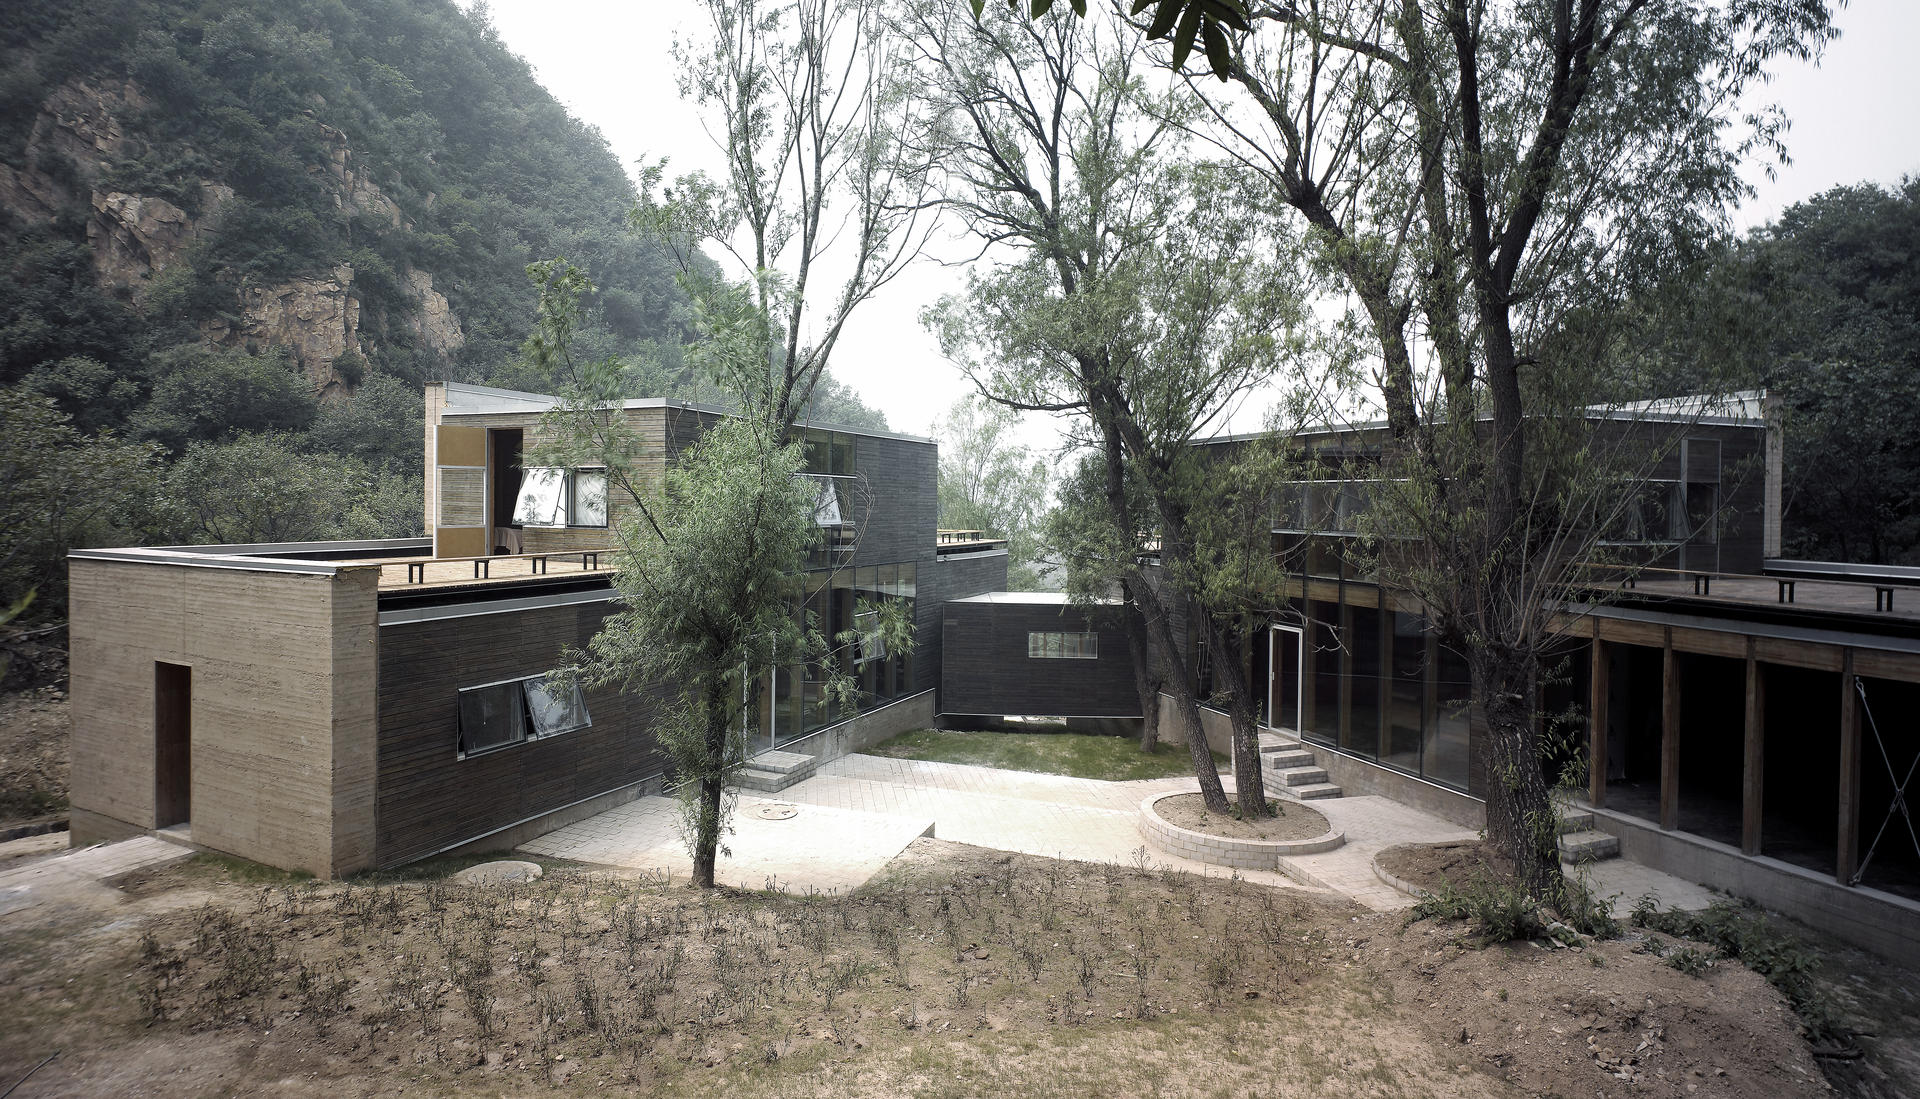 Yung Ho Chang and some of his works: Split House by the Great Wall; 1966-76 Major Events Pavilion in Anren, Sichuan; Shanghai Corporate Pavilion; The Bay Garden, Qingpu district, Shanghai. Photo: Simon Song